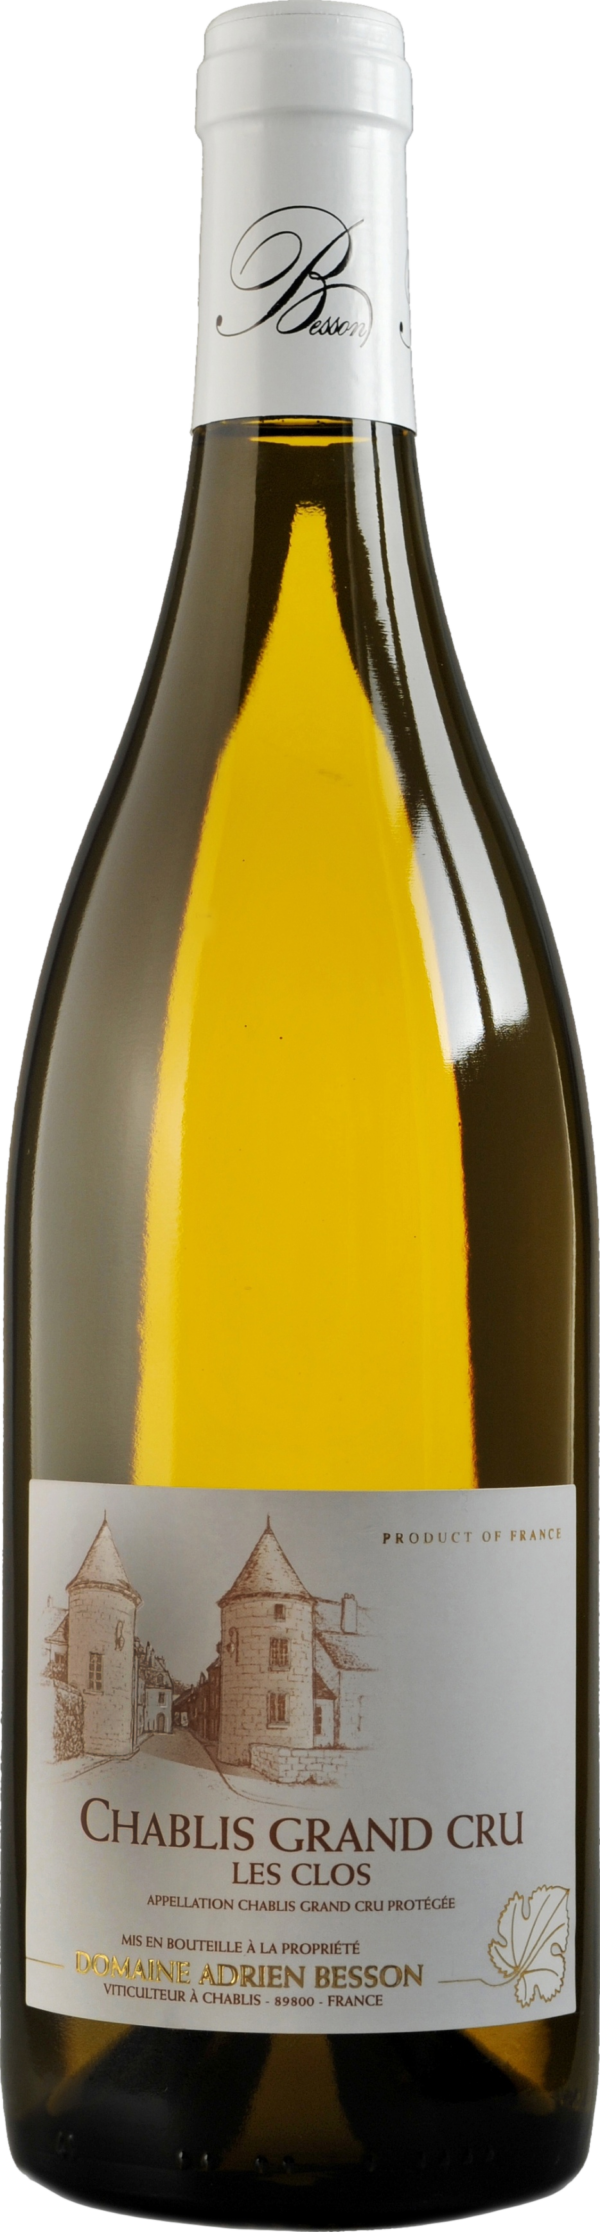 Product image of Domaine Besson Chablis Grand Cru Les Clos 2021 from 8wines